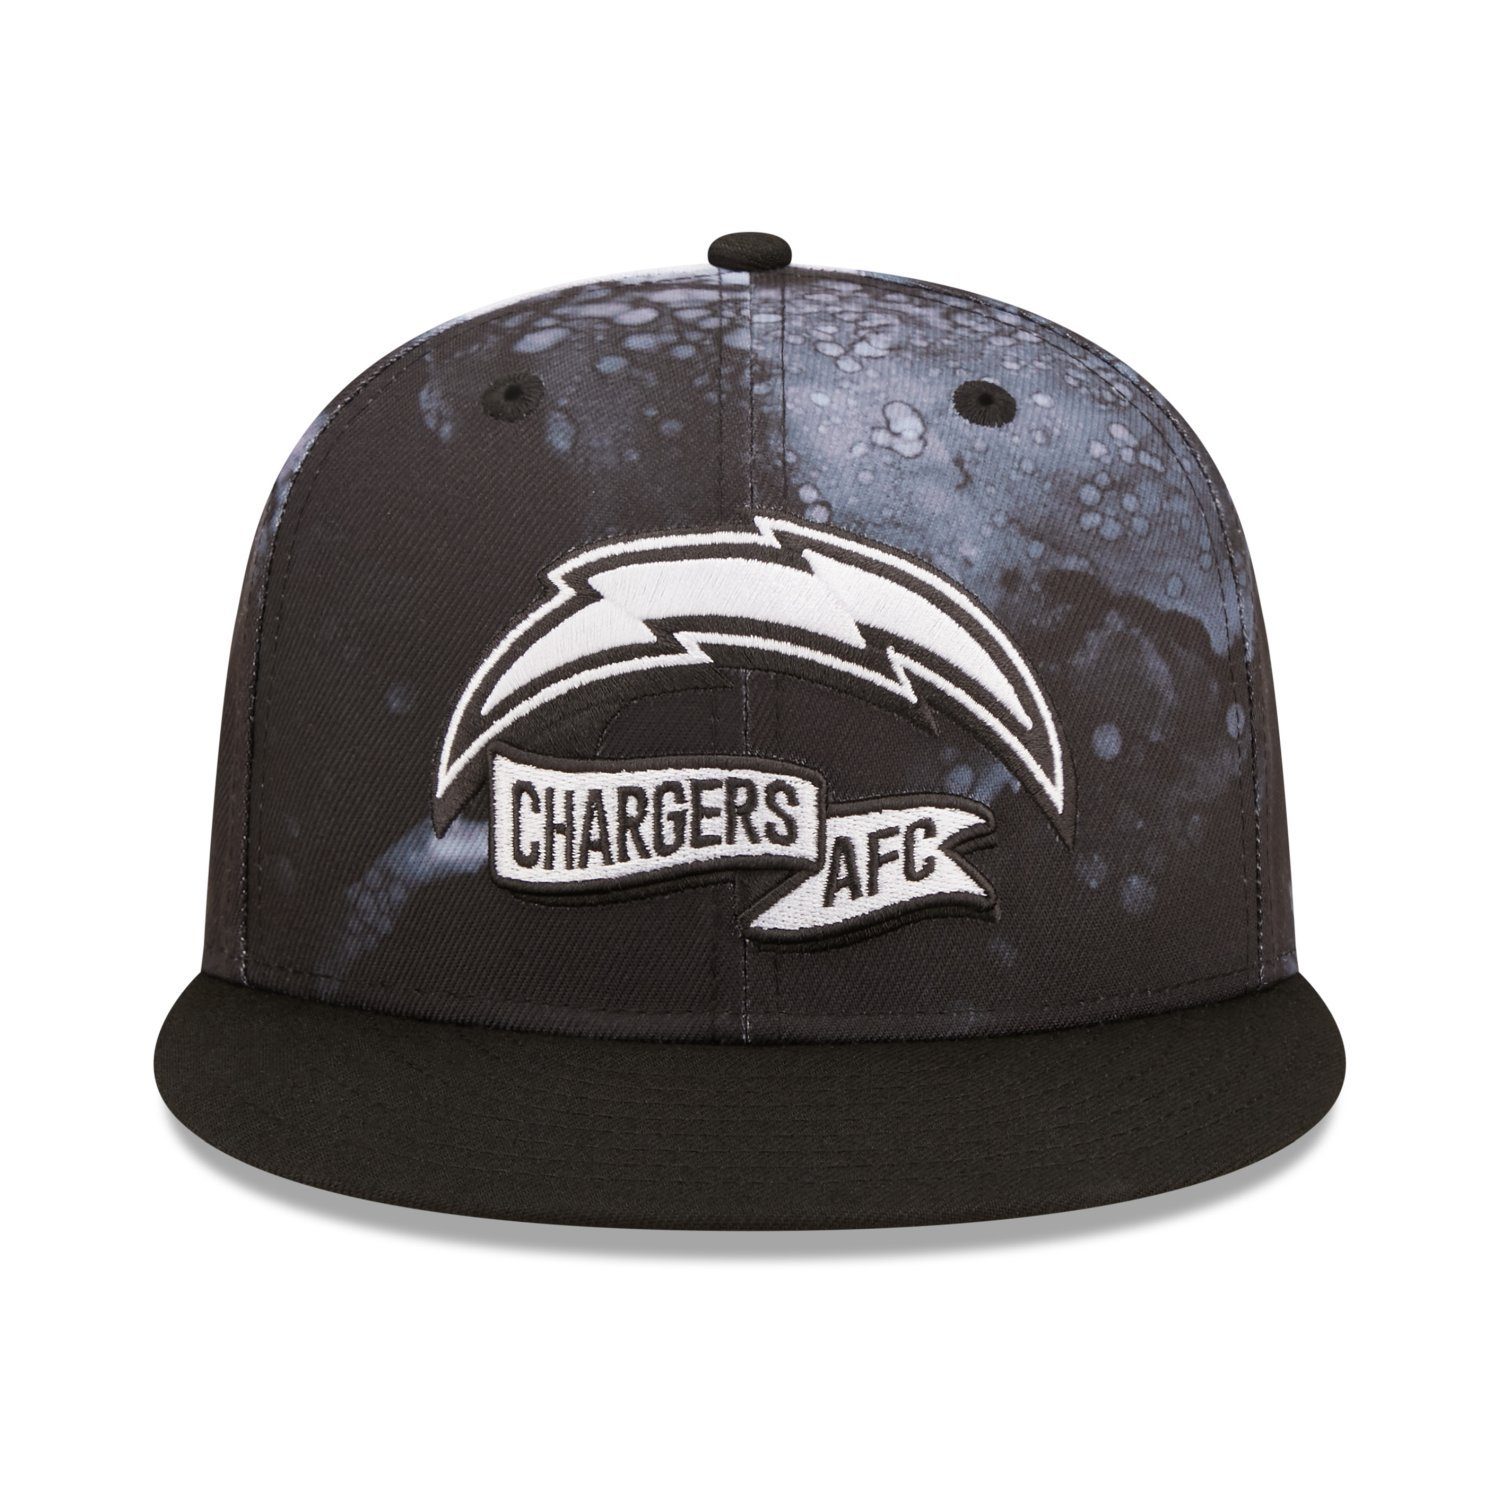 New Era Snapback Cap 9Fifty Chargers Sideline Los Angeles